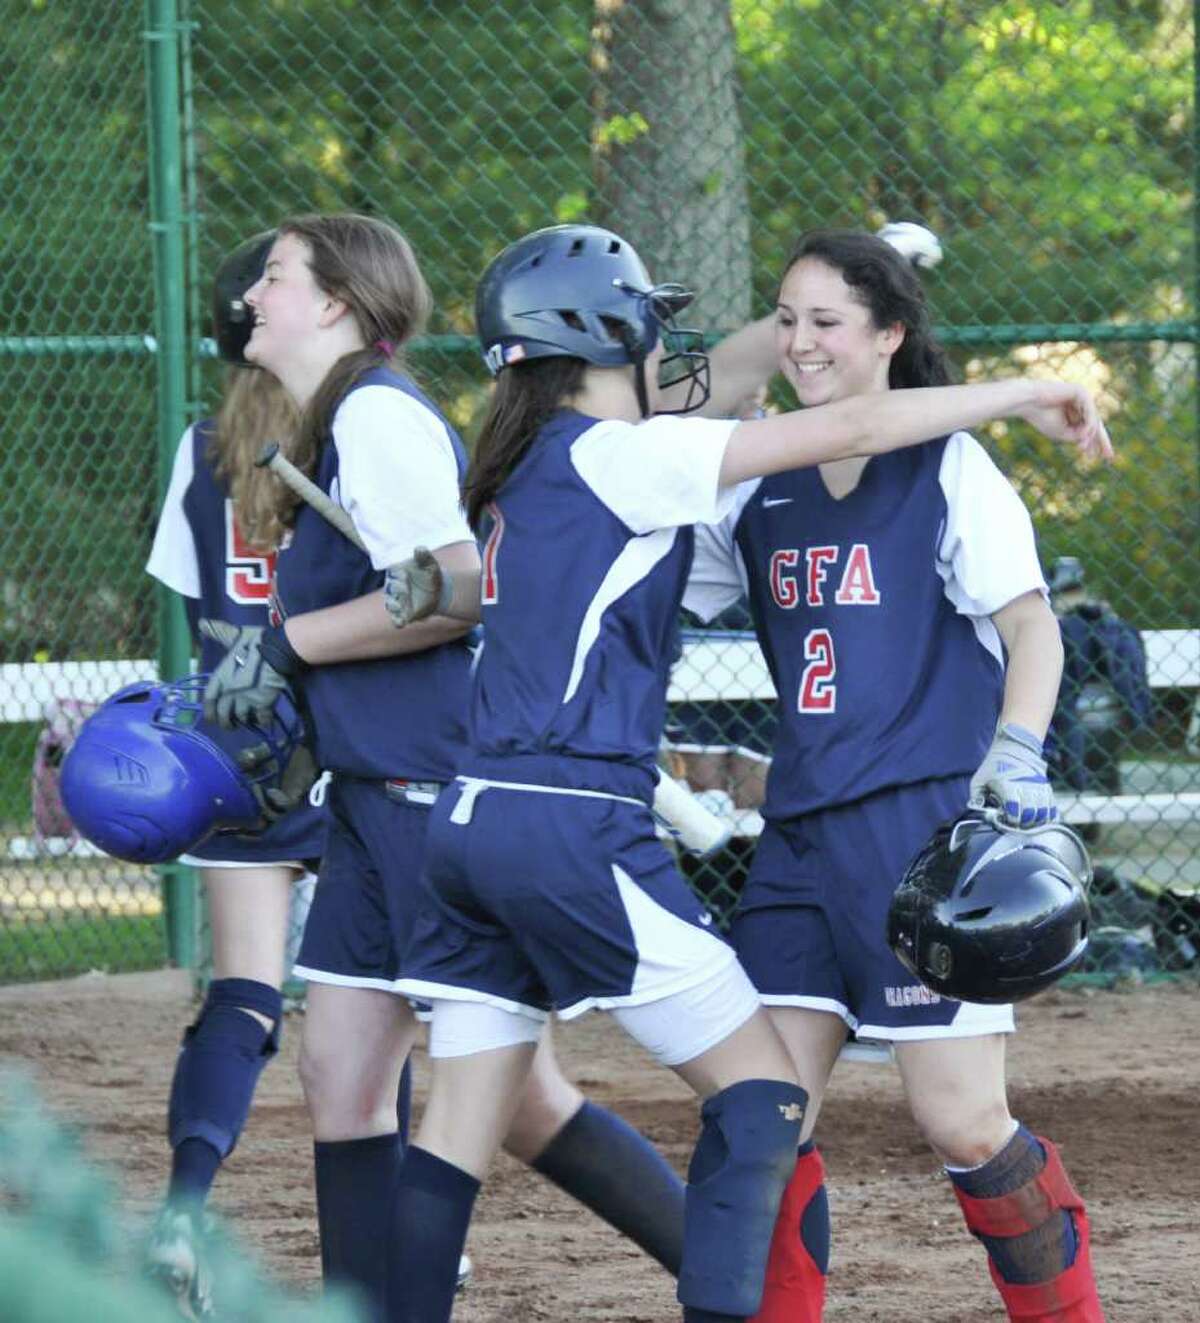 Greens Farms Academy senior captain Idalia Friedson, right, is congratulated by sophomore Miranda Princi after hitting a grand slam home run in a 15-11 victory over Holy Child last week. Friedson will play softball next year for Amherst College.